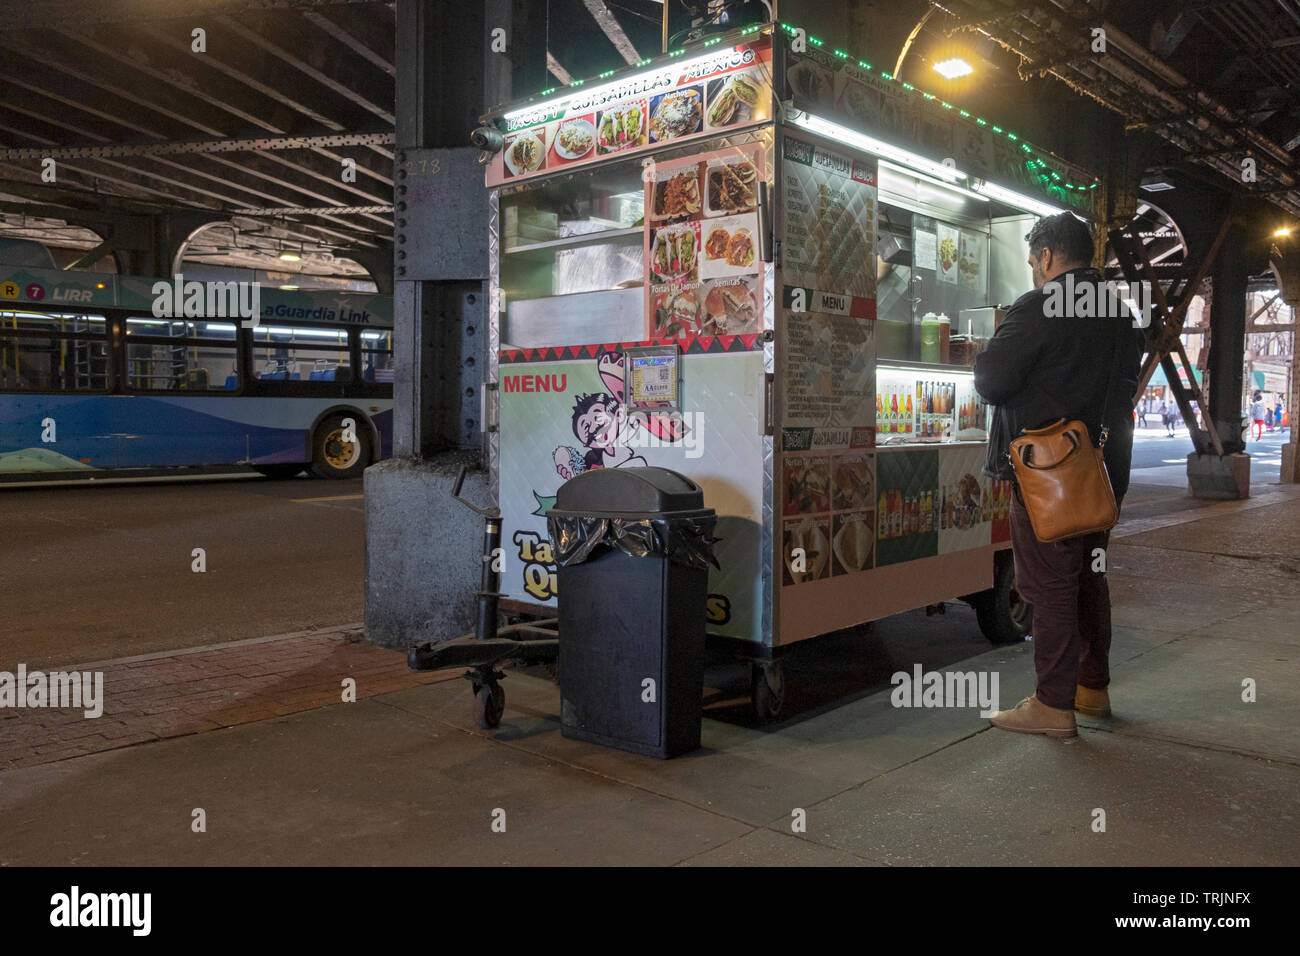 On his way home from work, a man buys fast food from a Mexican food cart under the el in Woodside, Queens, New York. Stock Photo